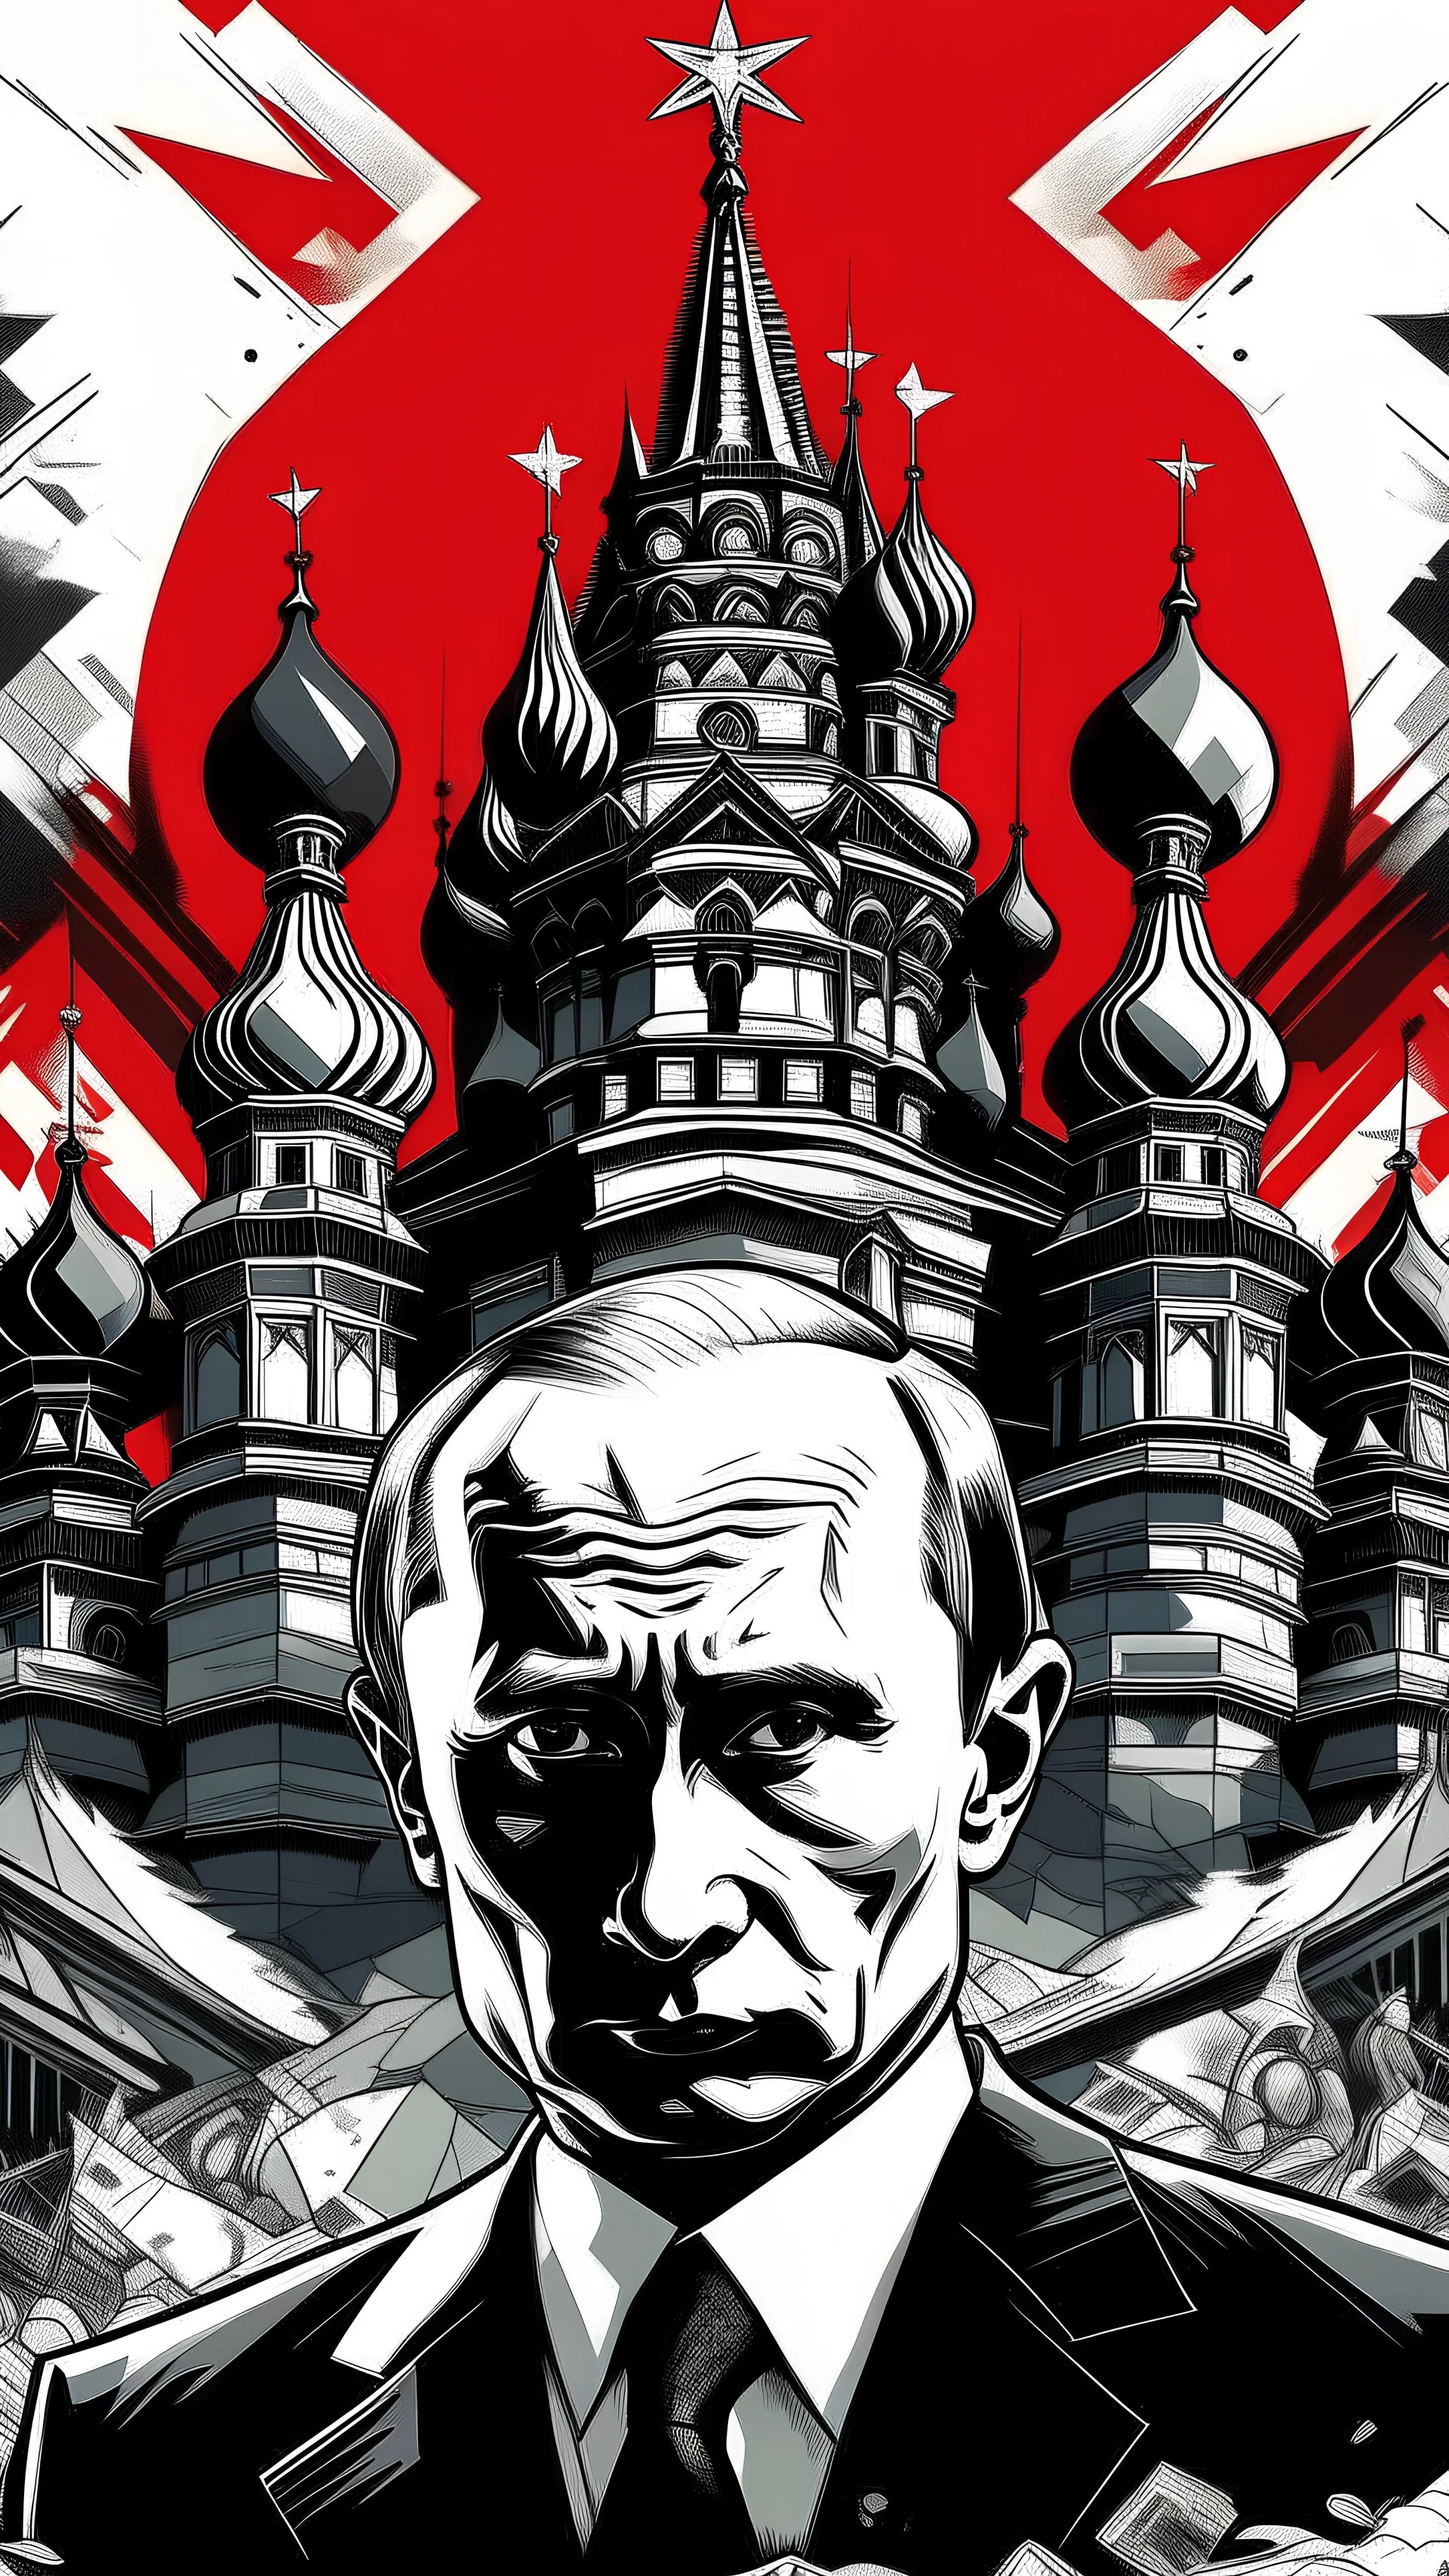 Create a highly detailed image of Russia's awareness of the retaliation.